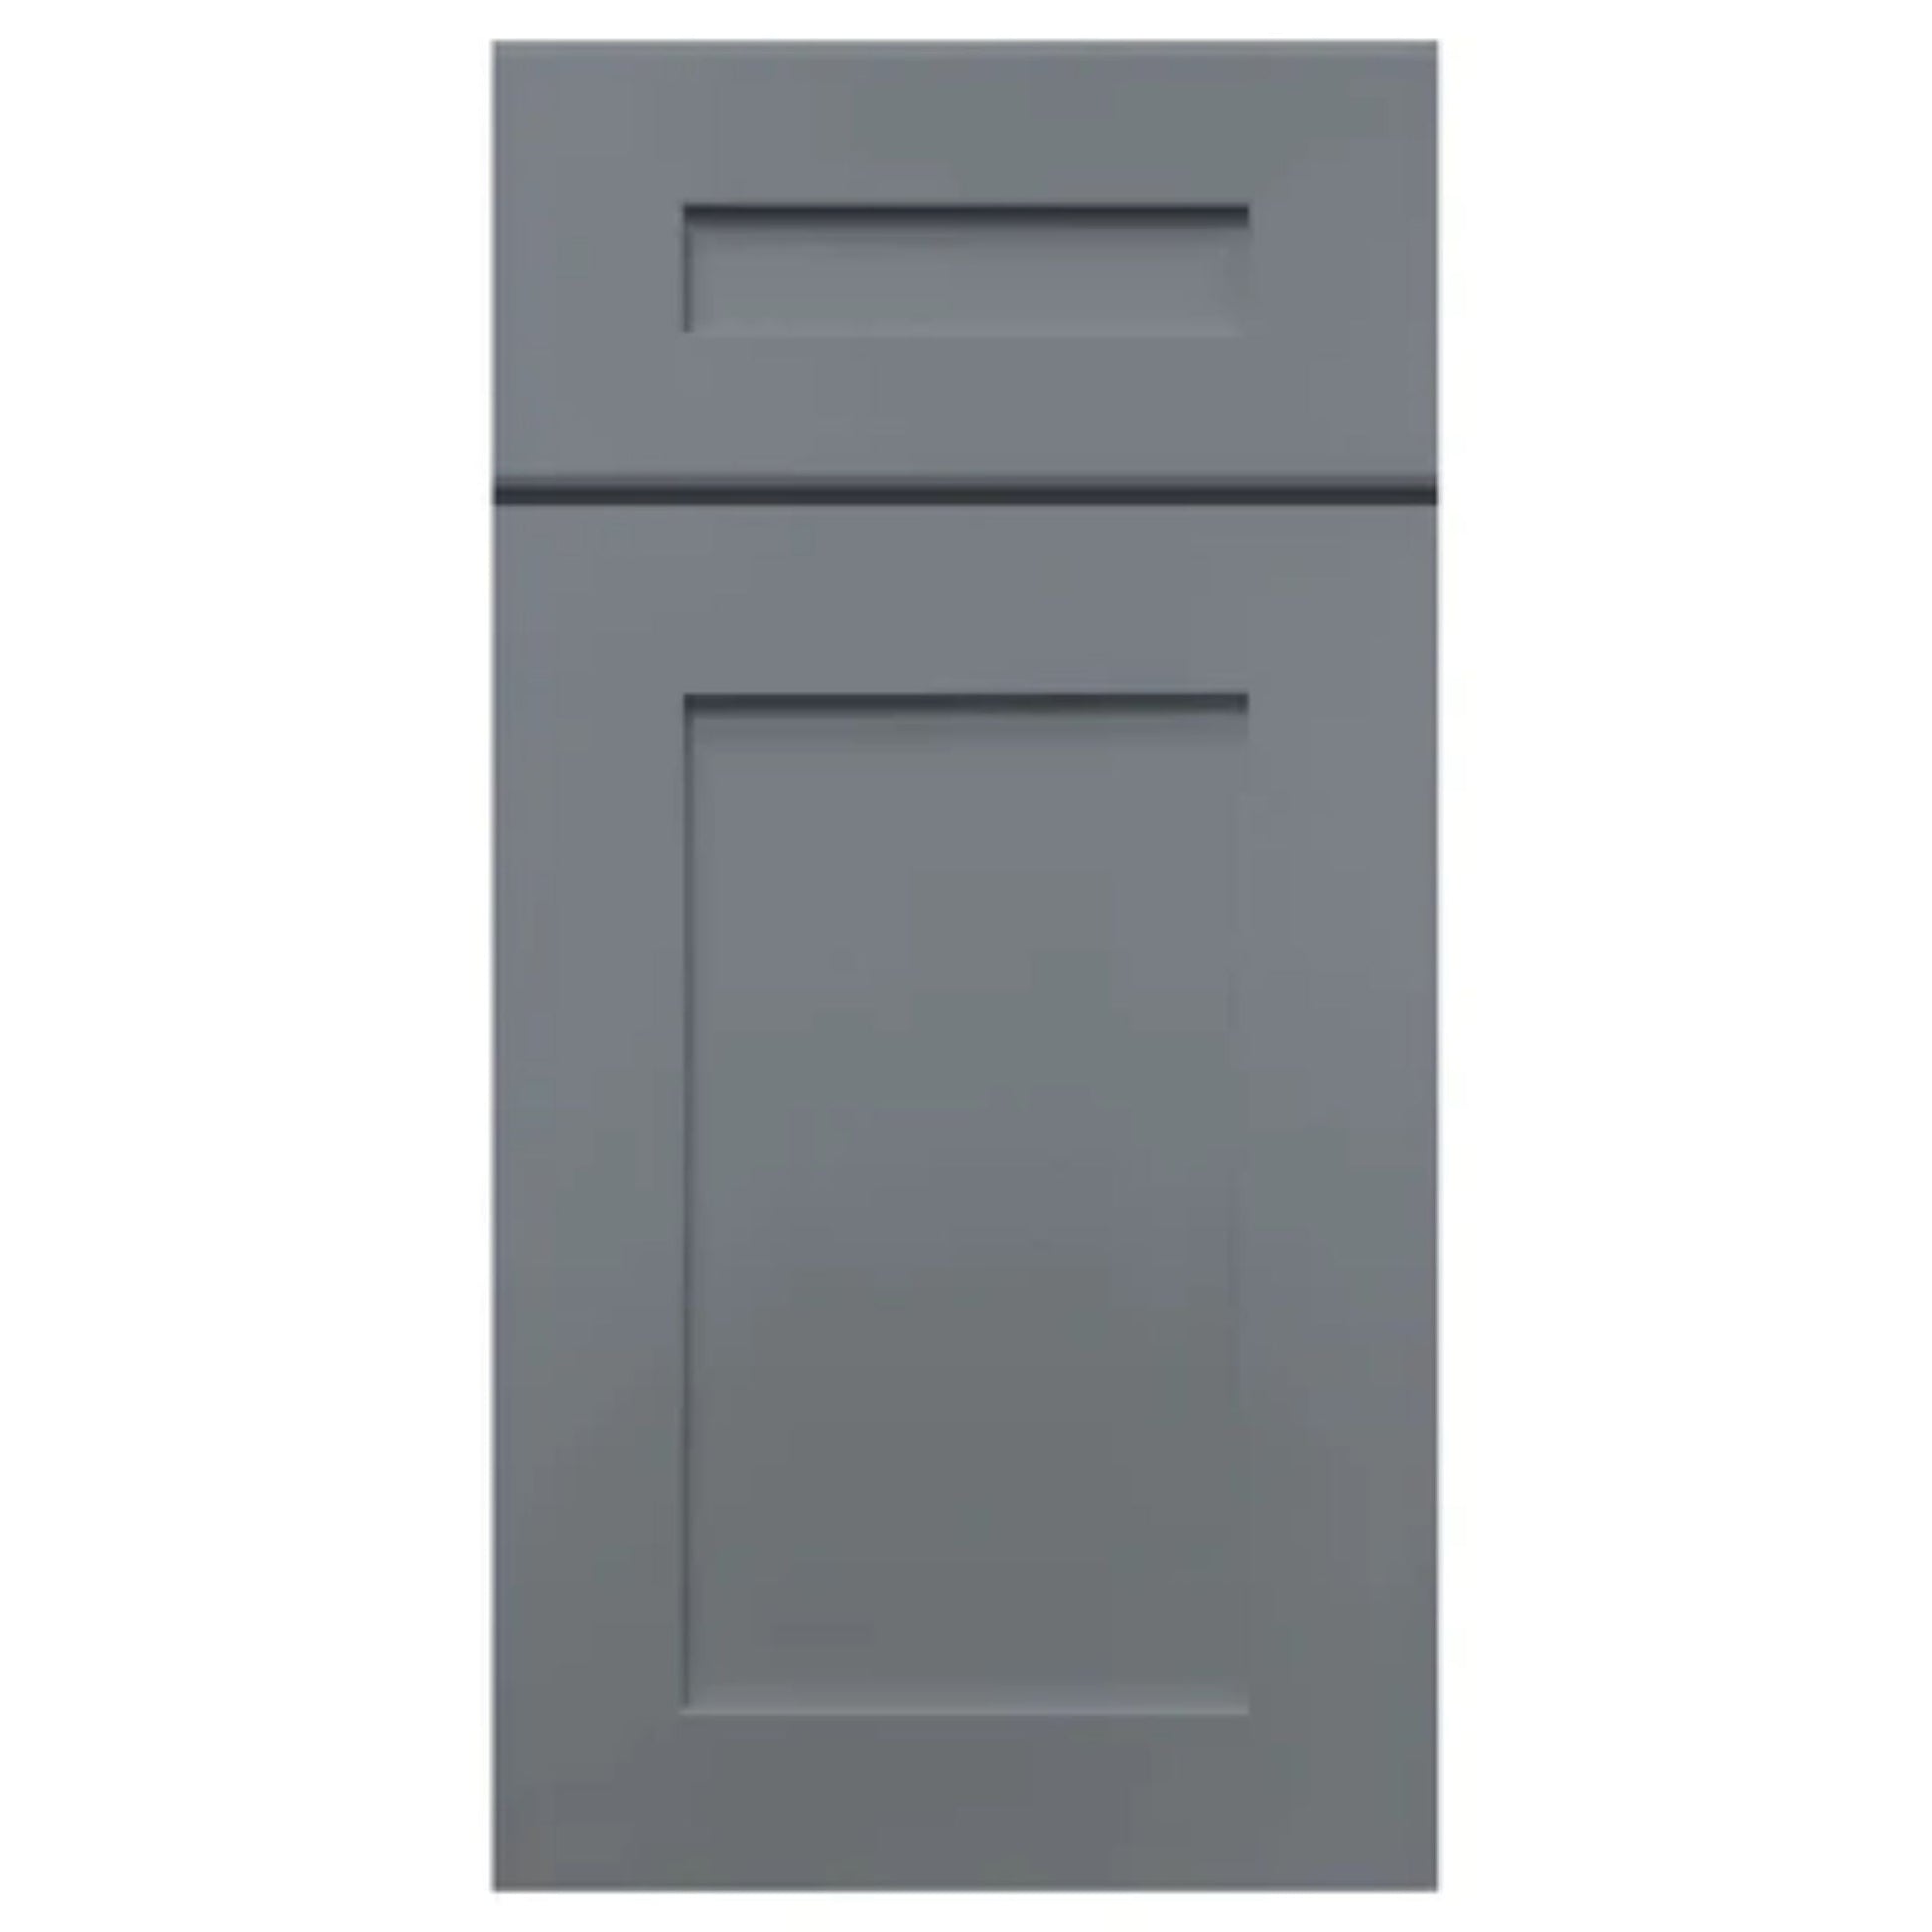 LessCare 30" x 34.5" x 21" Colonial Gray Vanity Sink Base Cabinet